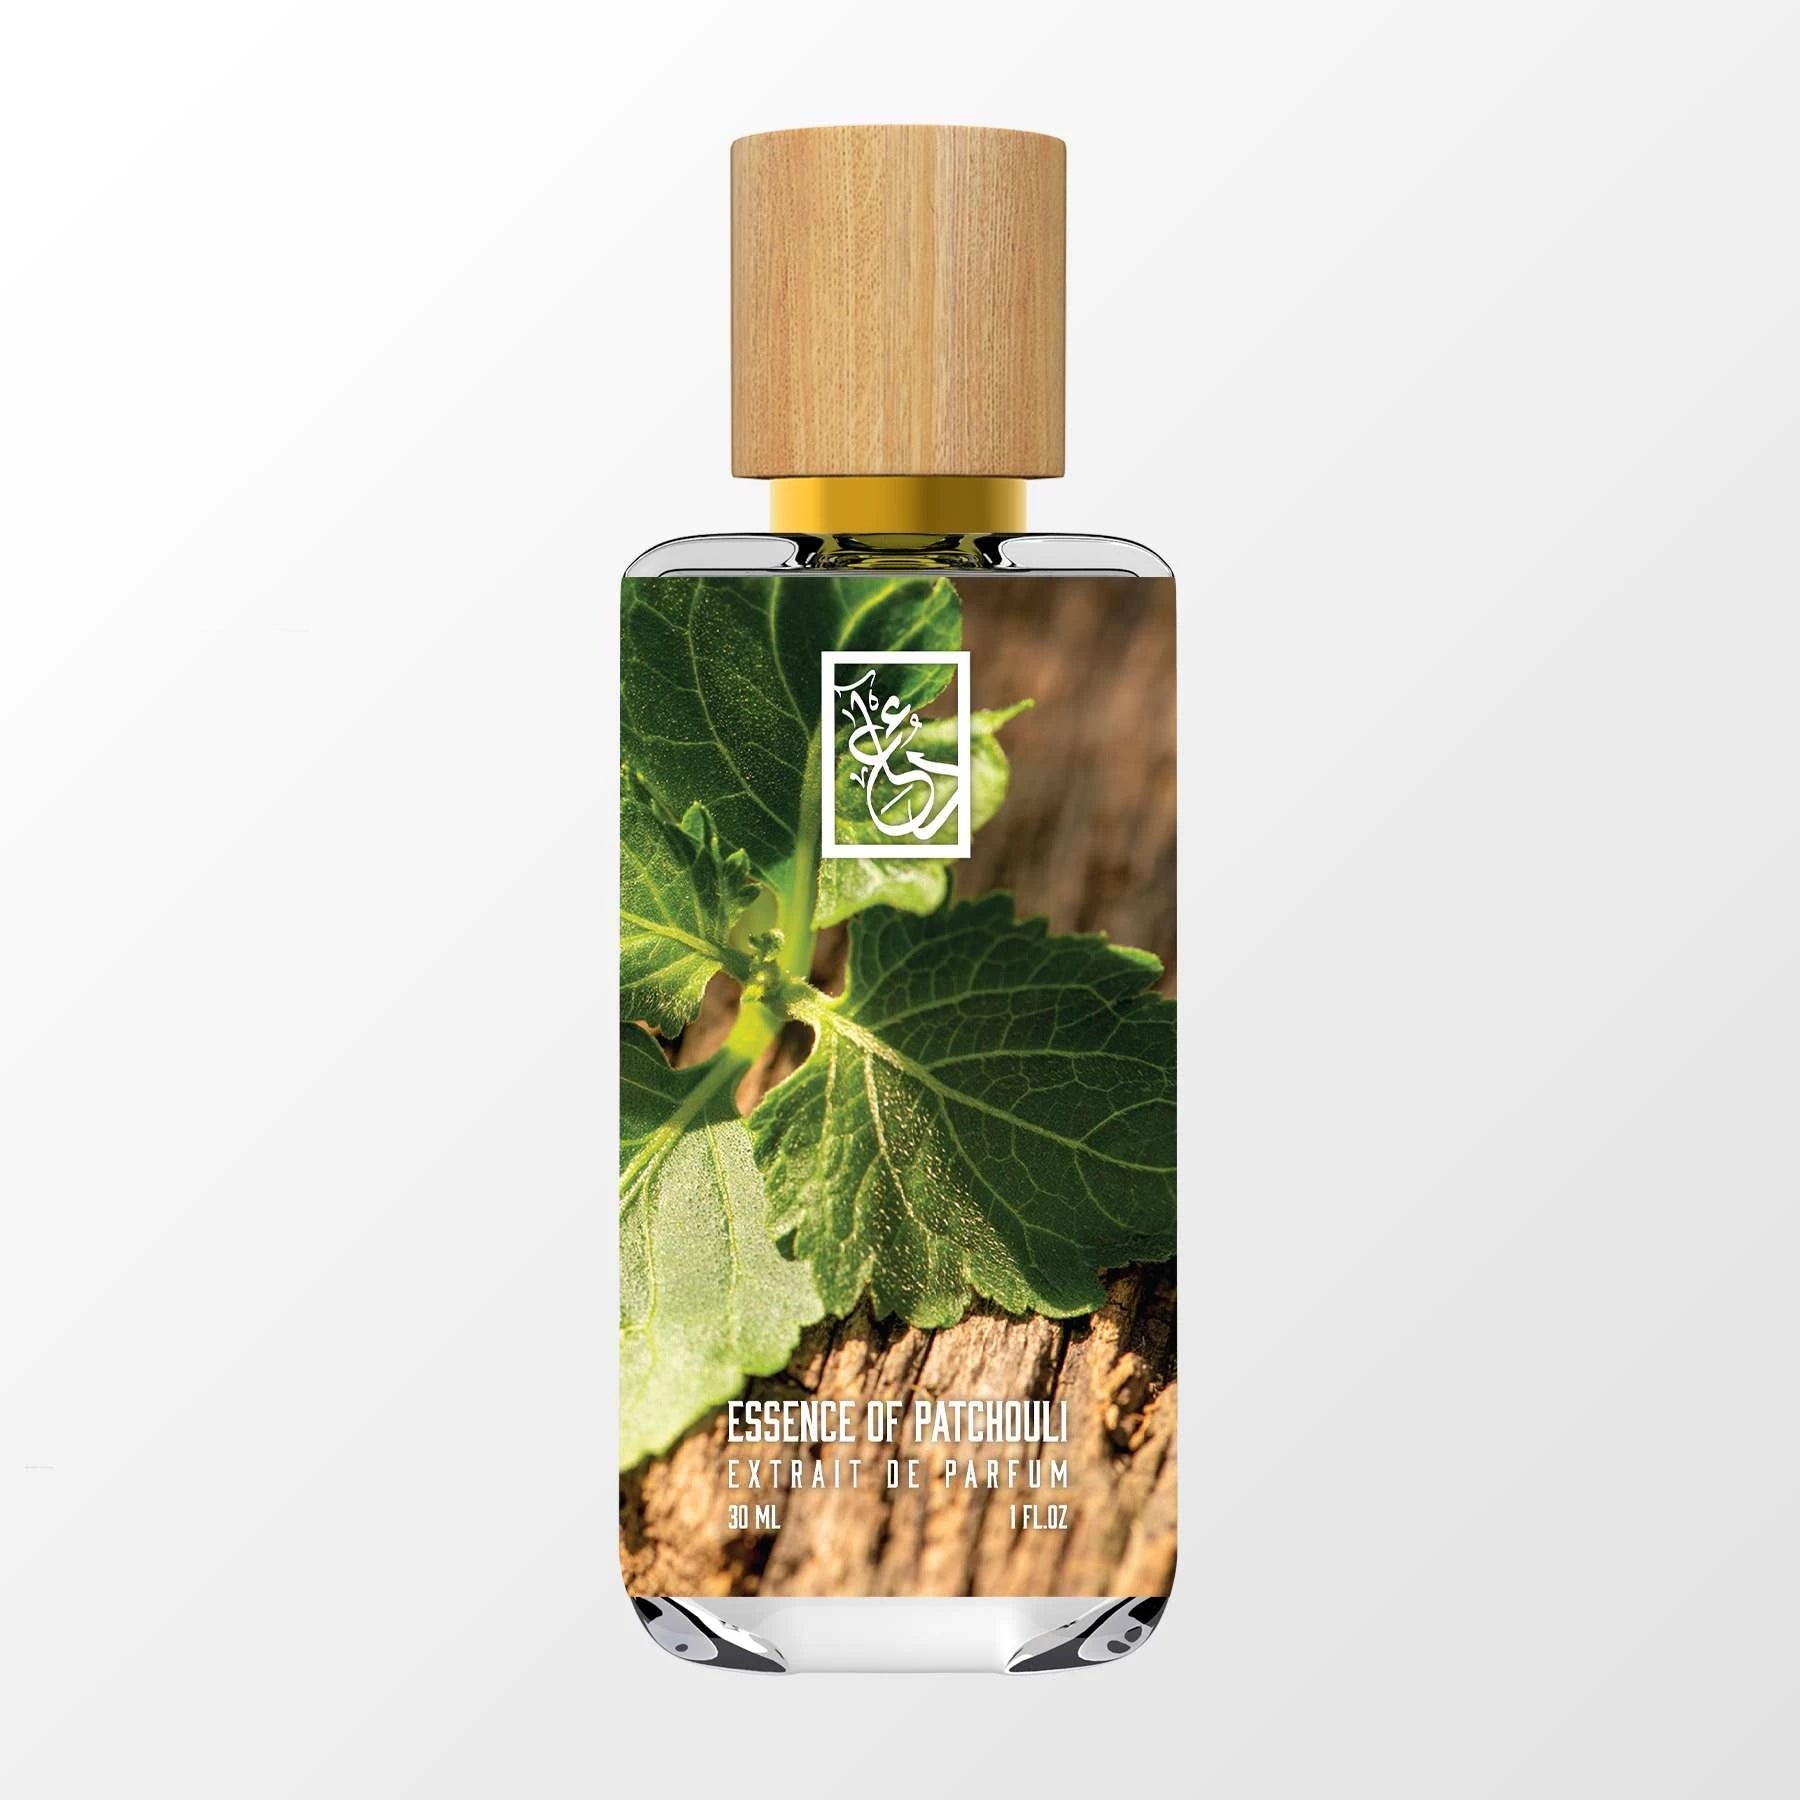 Essence of Patchouli - DUA FRAGRANCES - Inspired by Patchouli